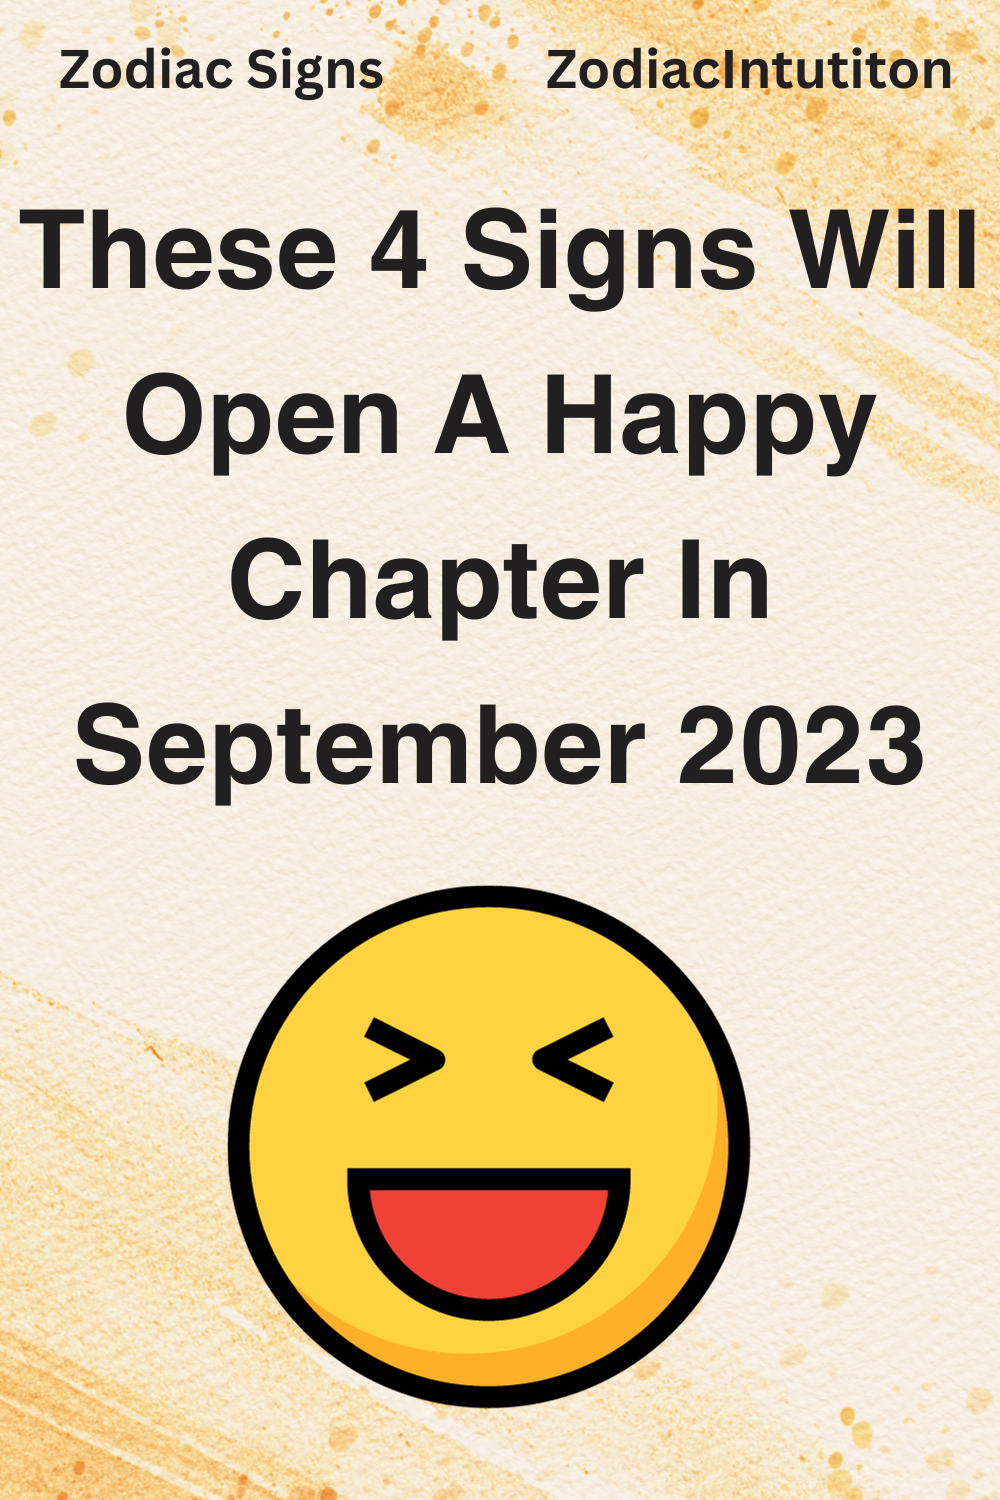 These 4 Signs Will Open A Happy Chapter In September 2023